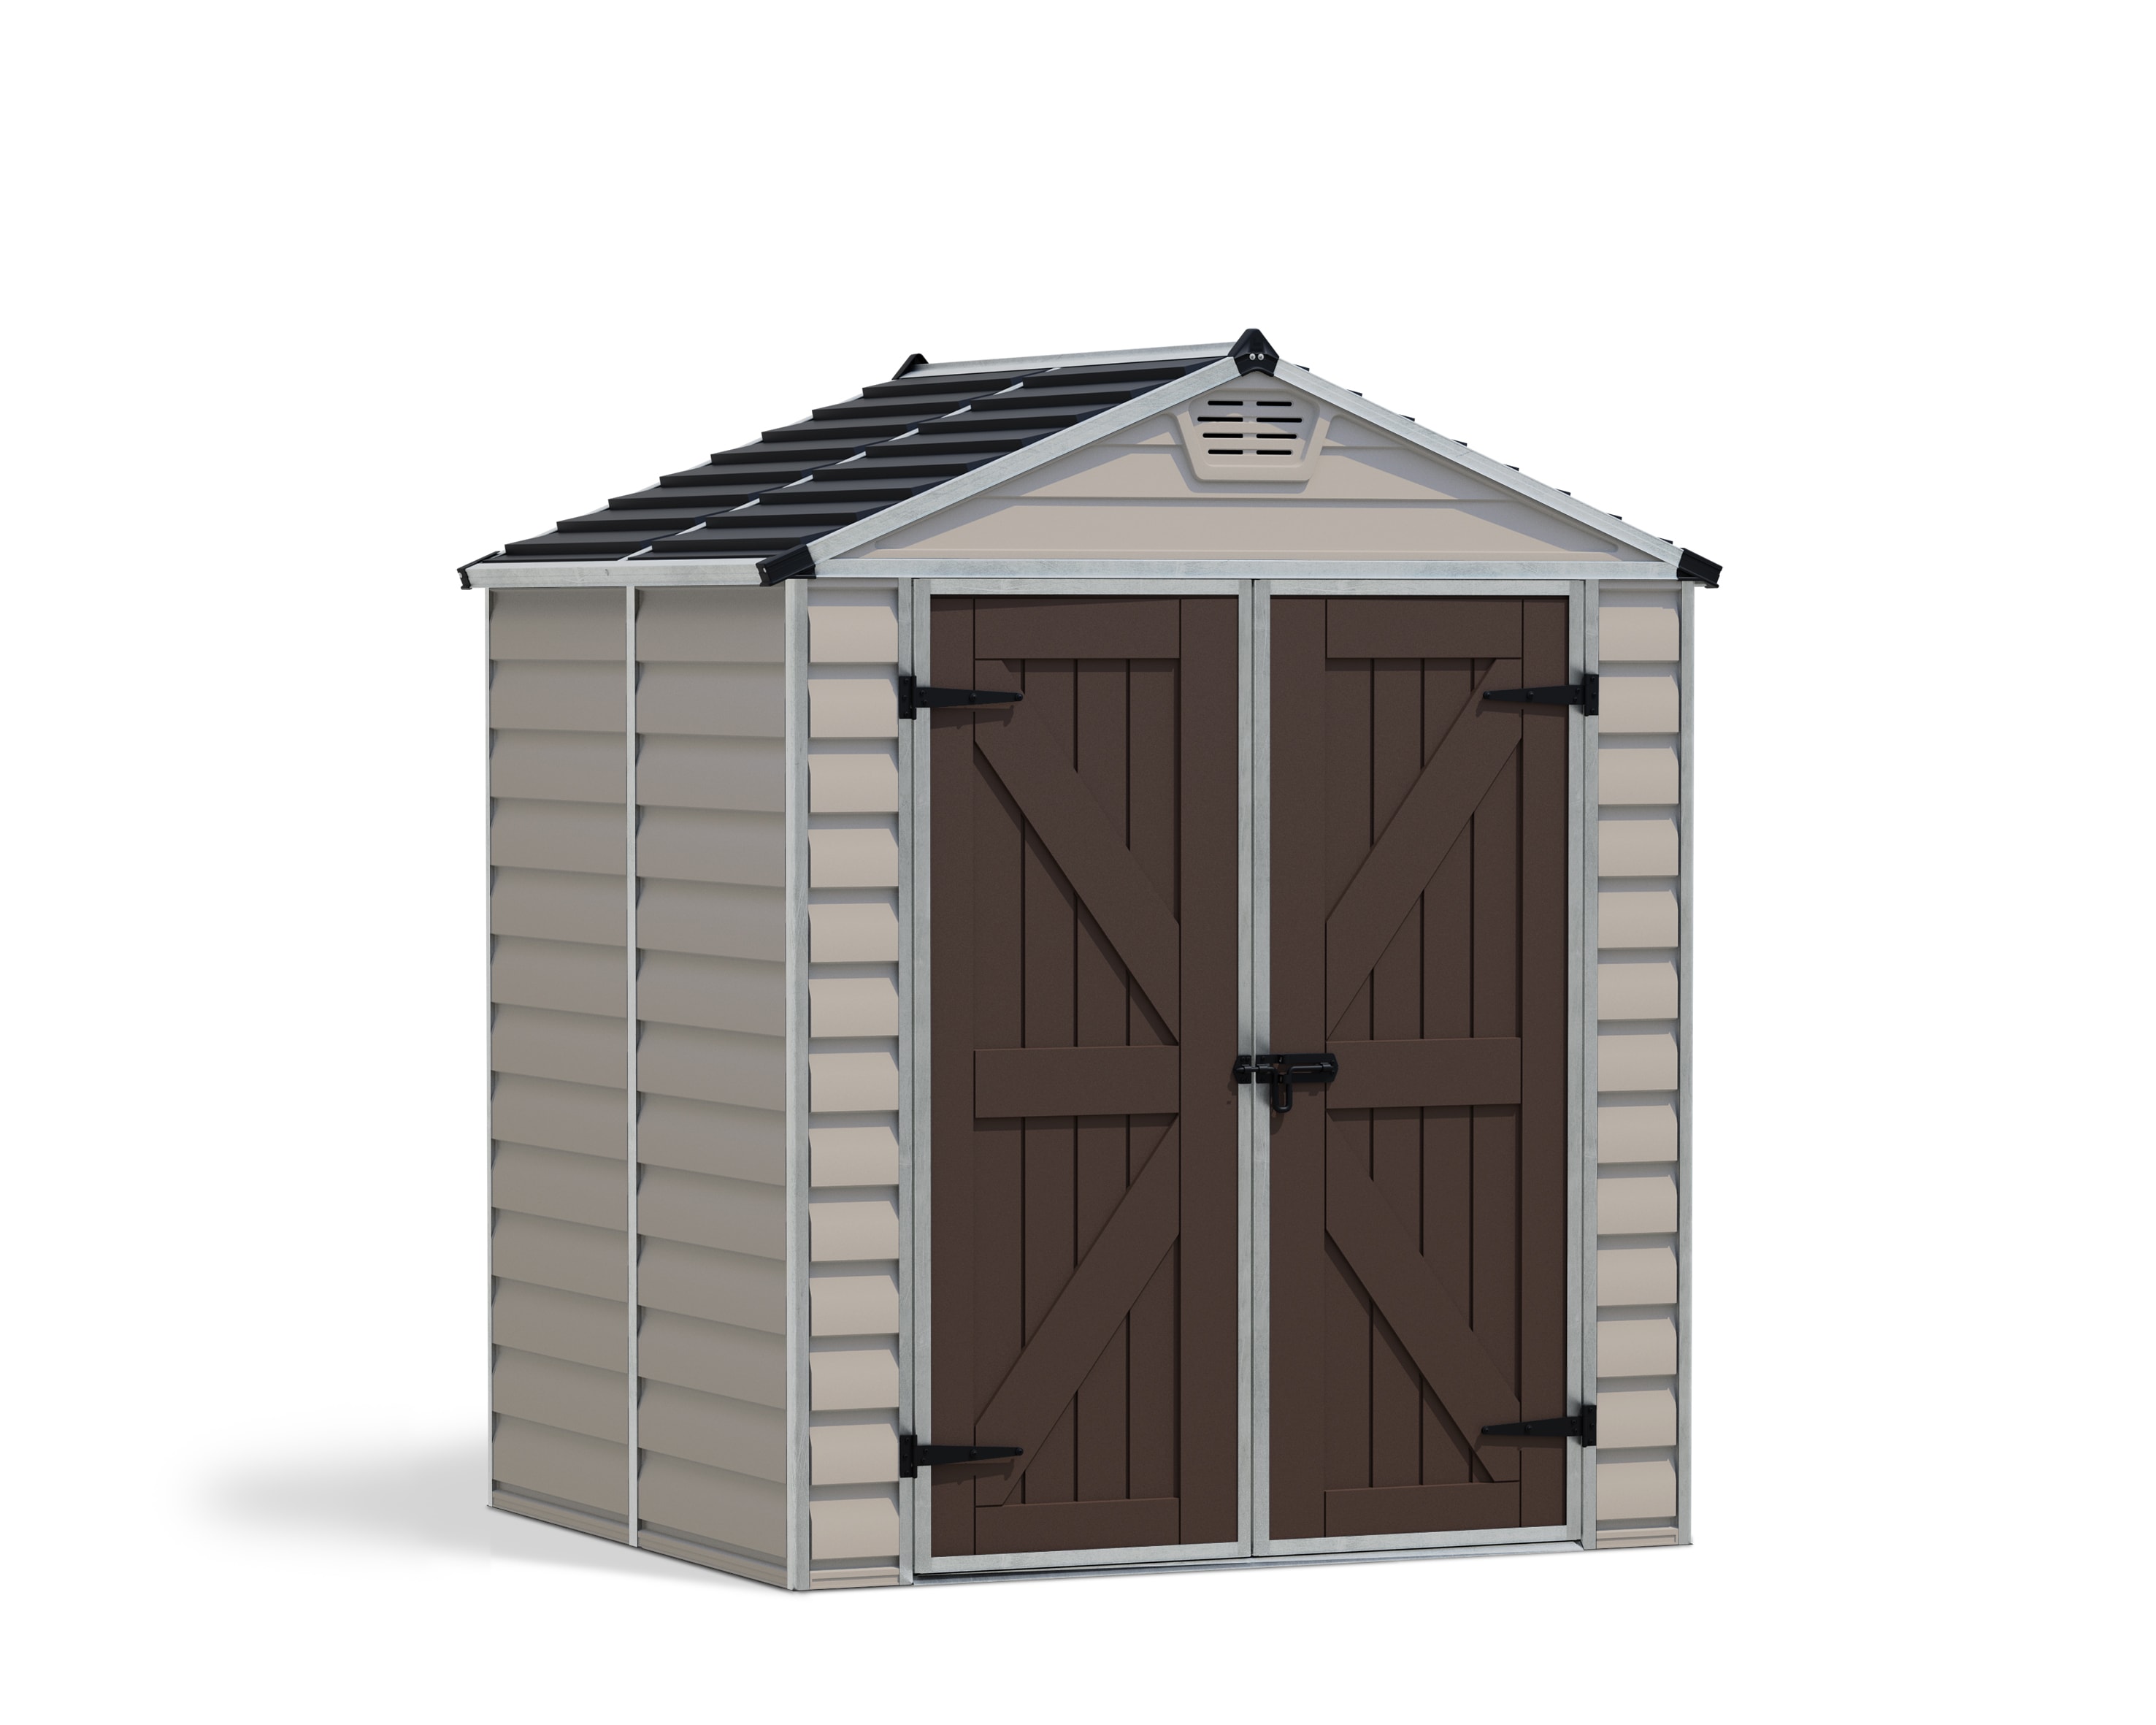 Rubbermaid Outdoor Storage Shed: 18 cu ft Capacity, Green/Tan, 47 in x 21  in x 29 in, Horizontal